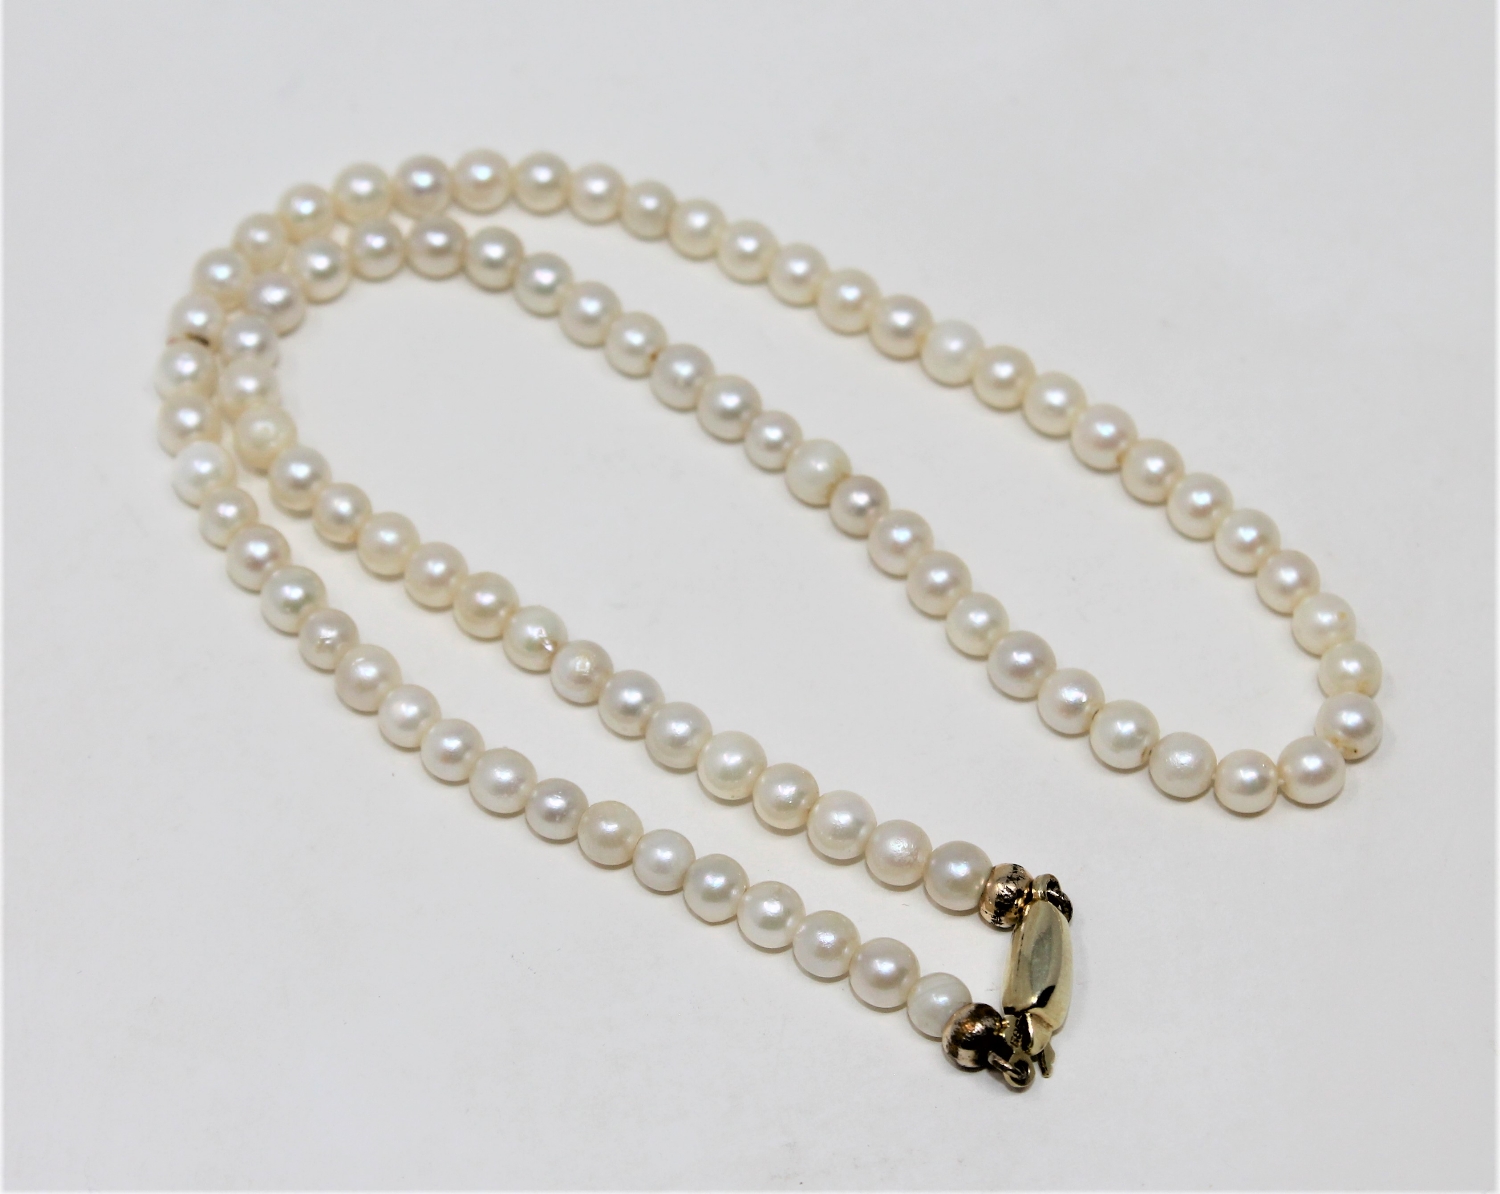 A continental cultured pearl necklace on 14ct gold clasp, length 36cm.